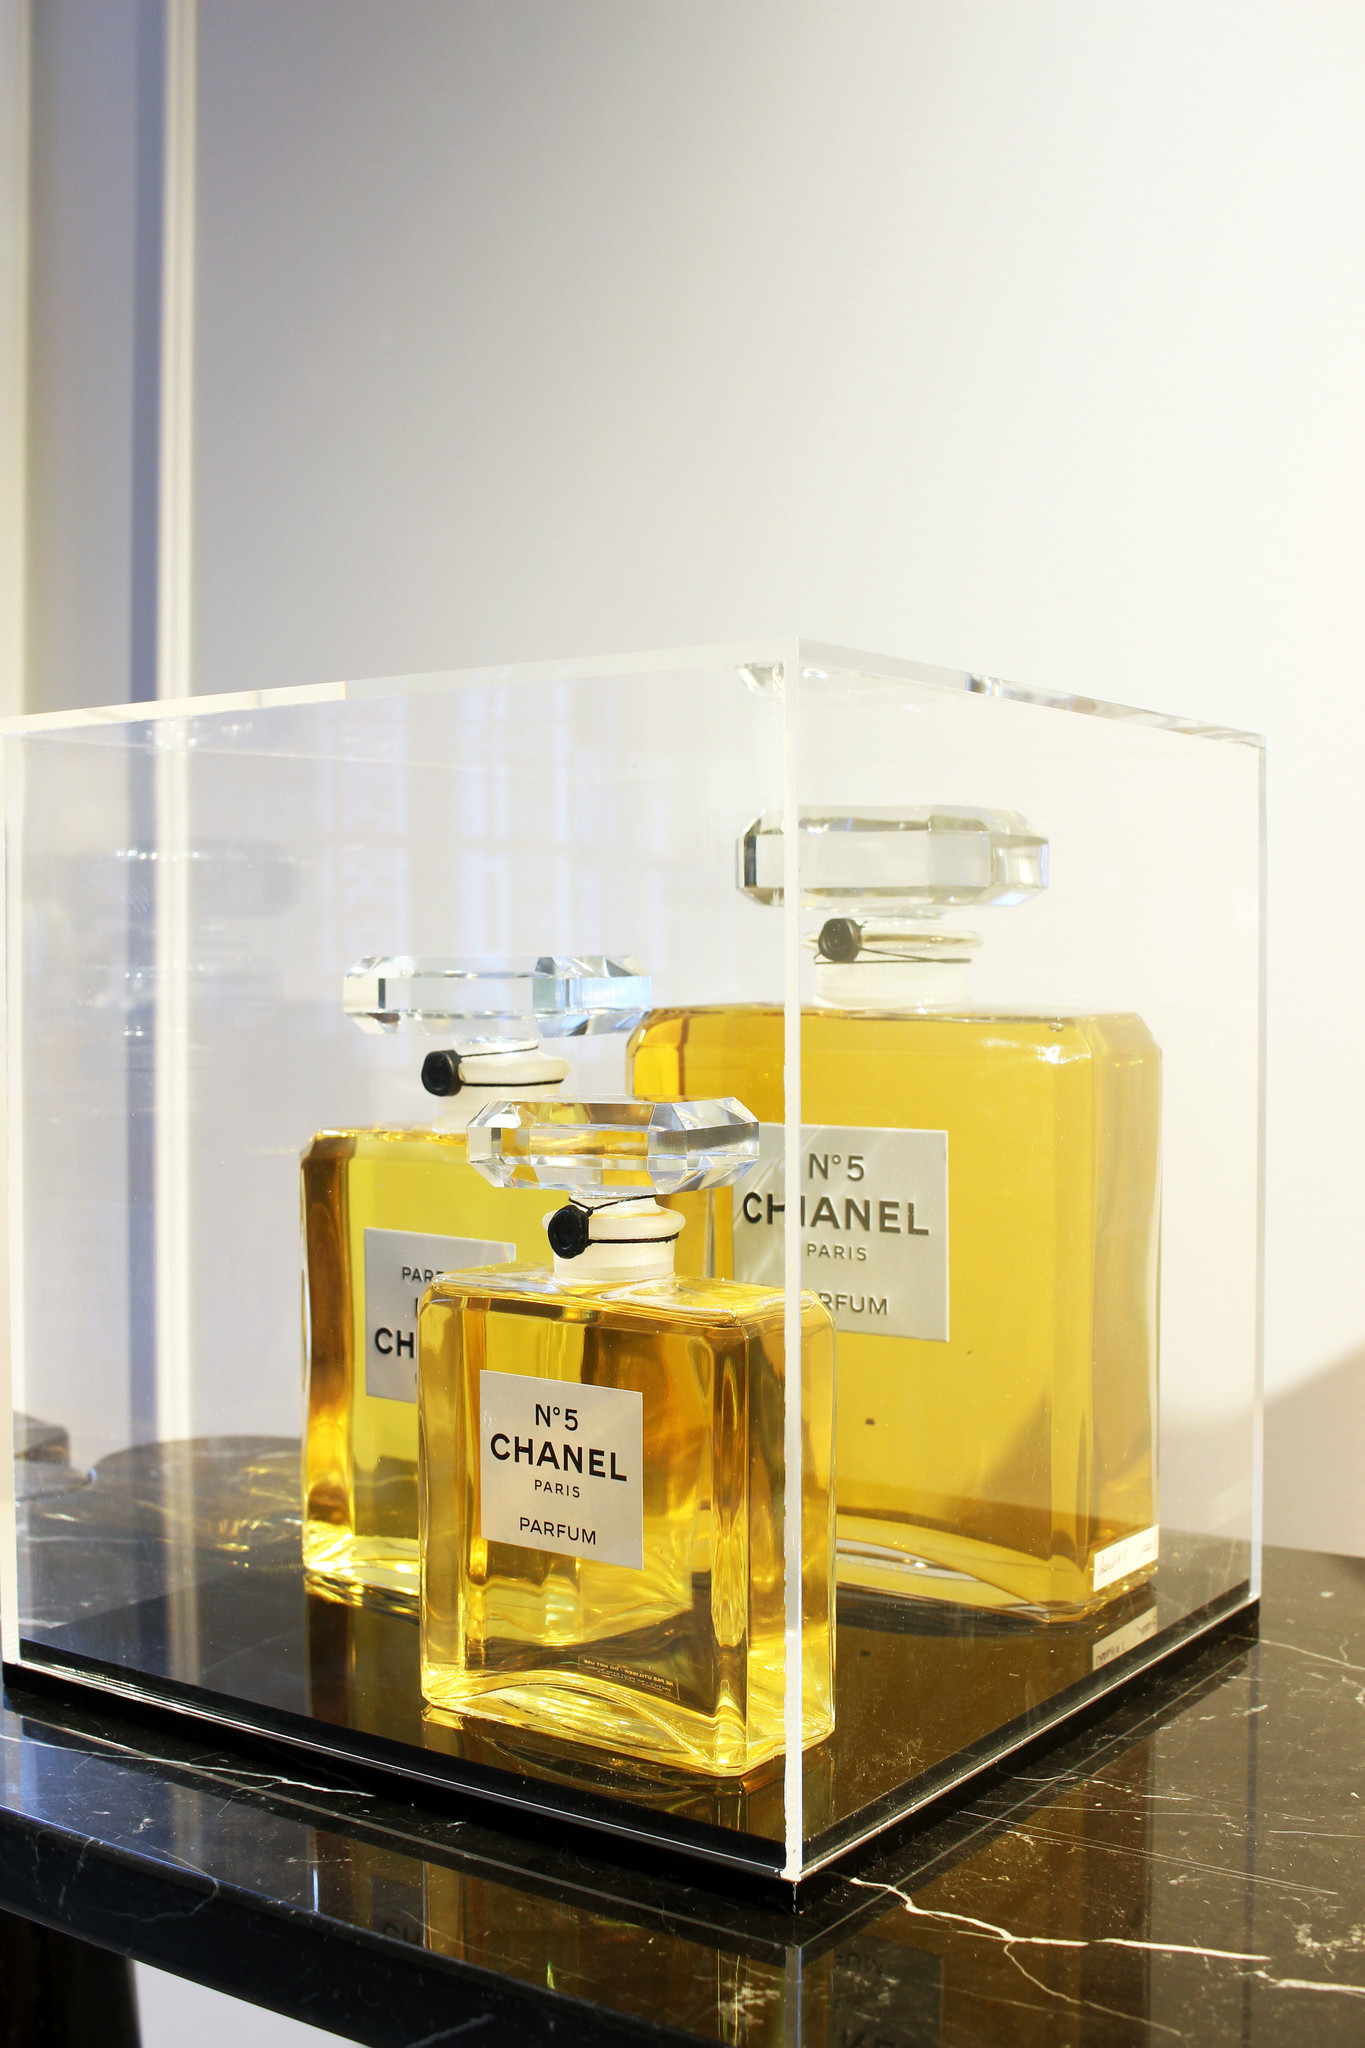 Large Chanel perfume bottles in display case